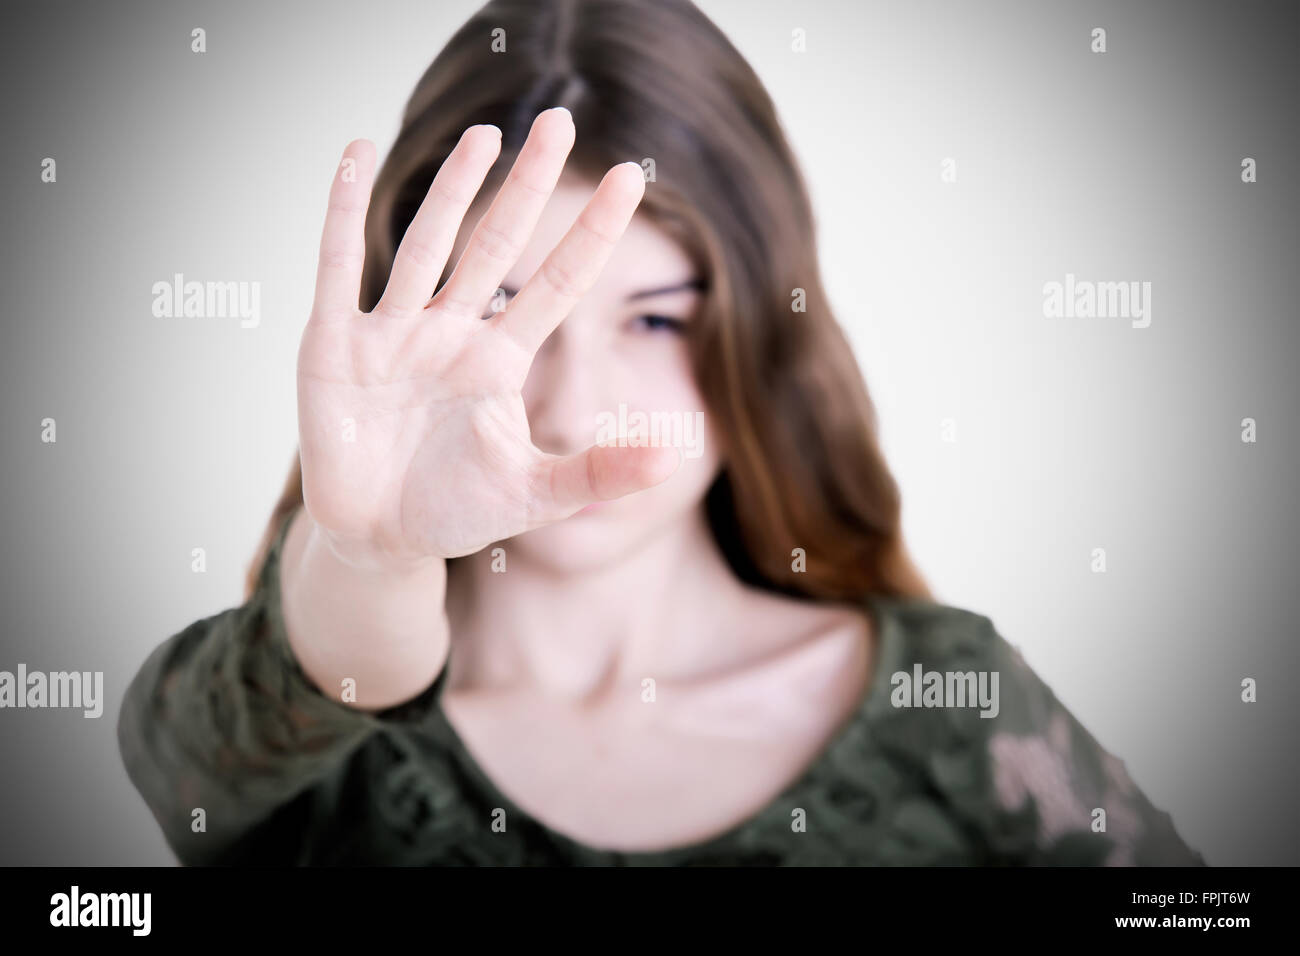 Closeup of a woman protecting herself from an aggressor, with a dark vignette Stock Photo